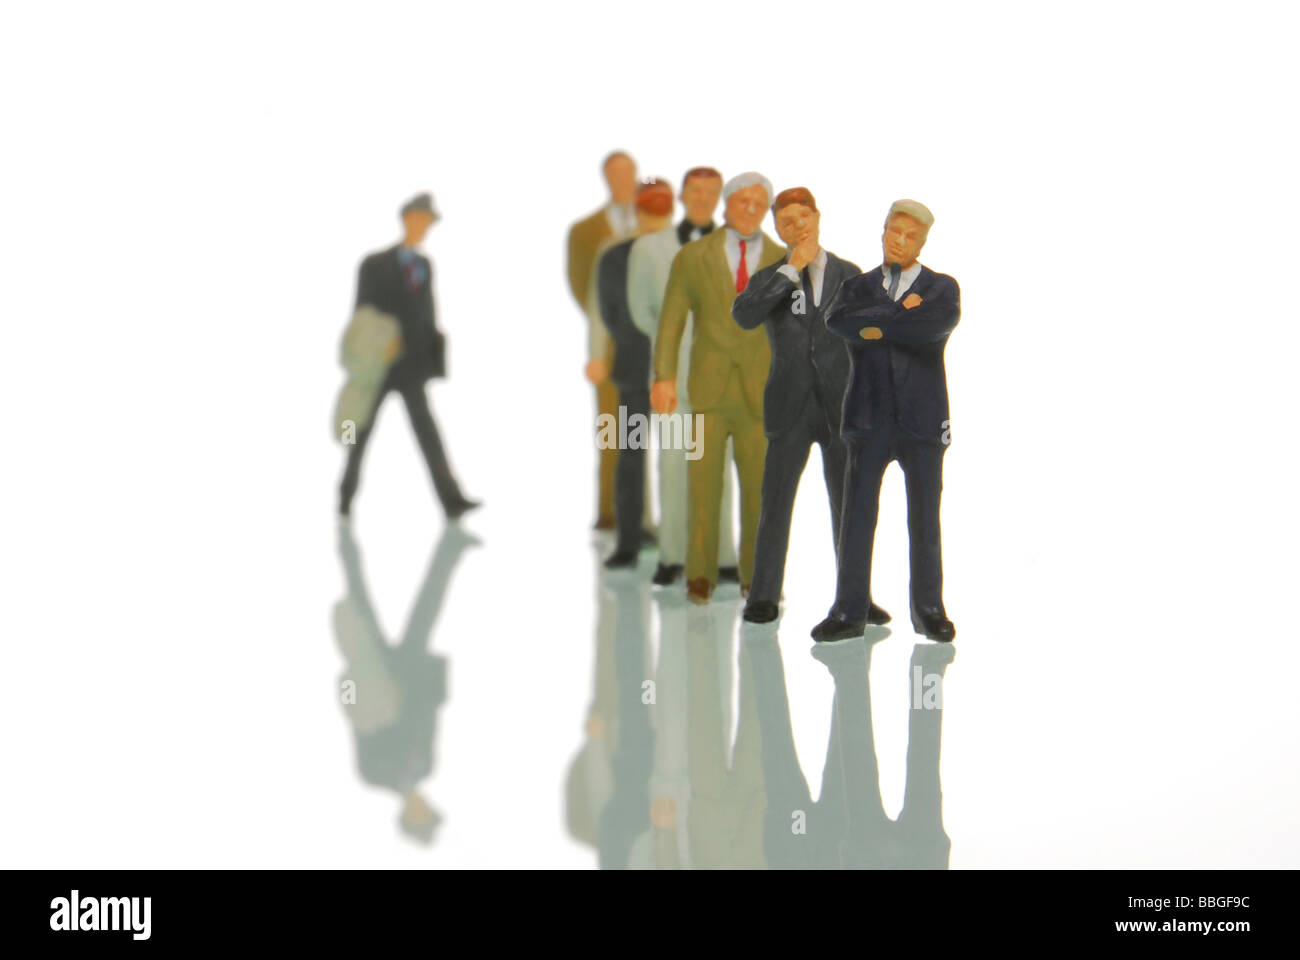 Manager figurines in a queue, symbolic image for job application Stock Photo